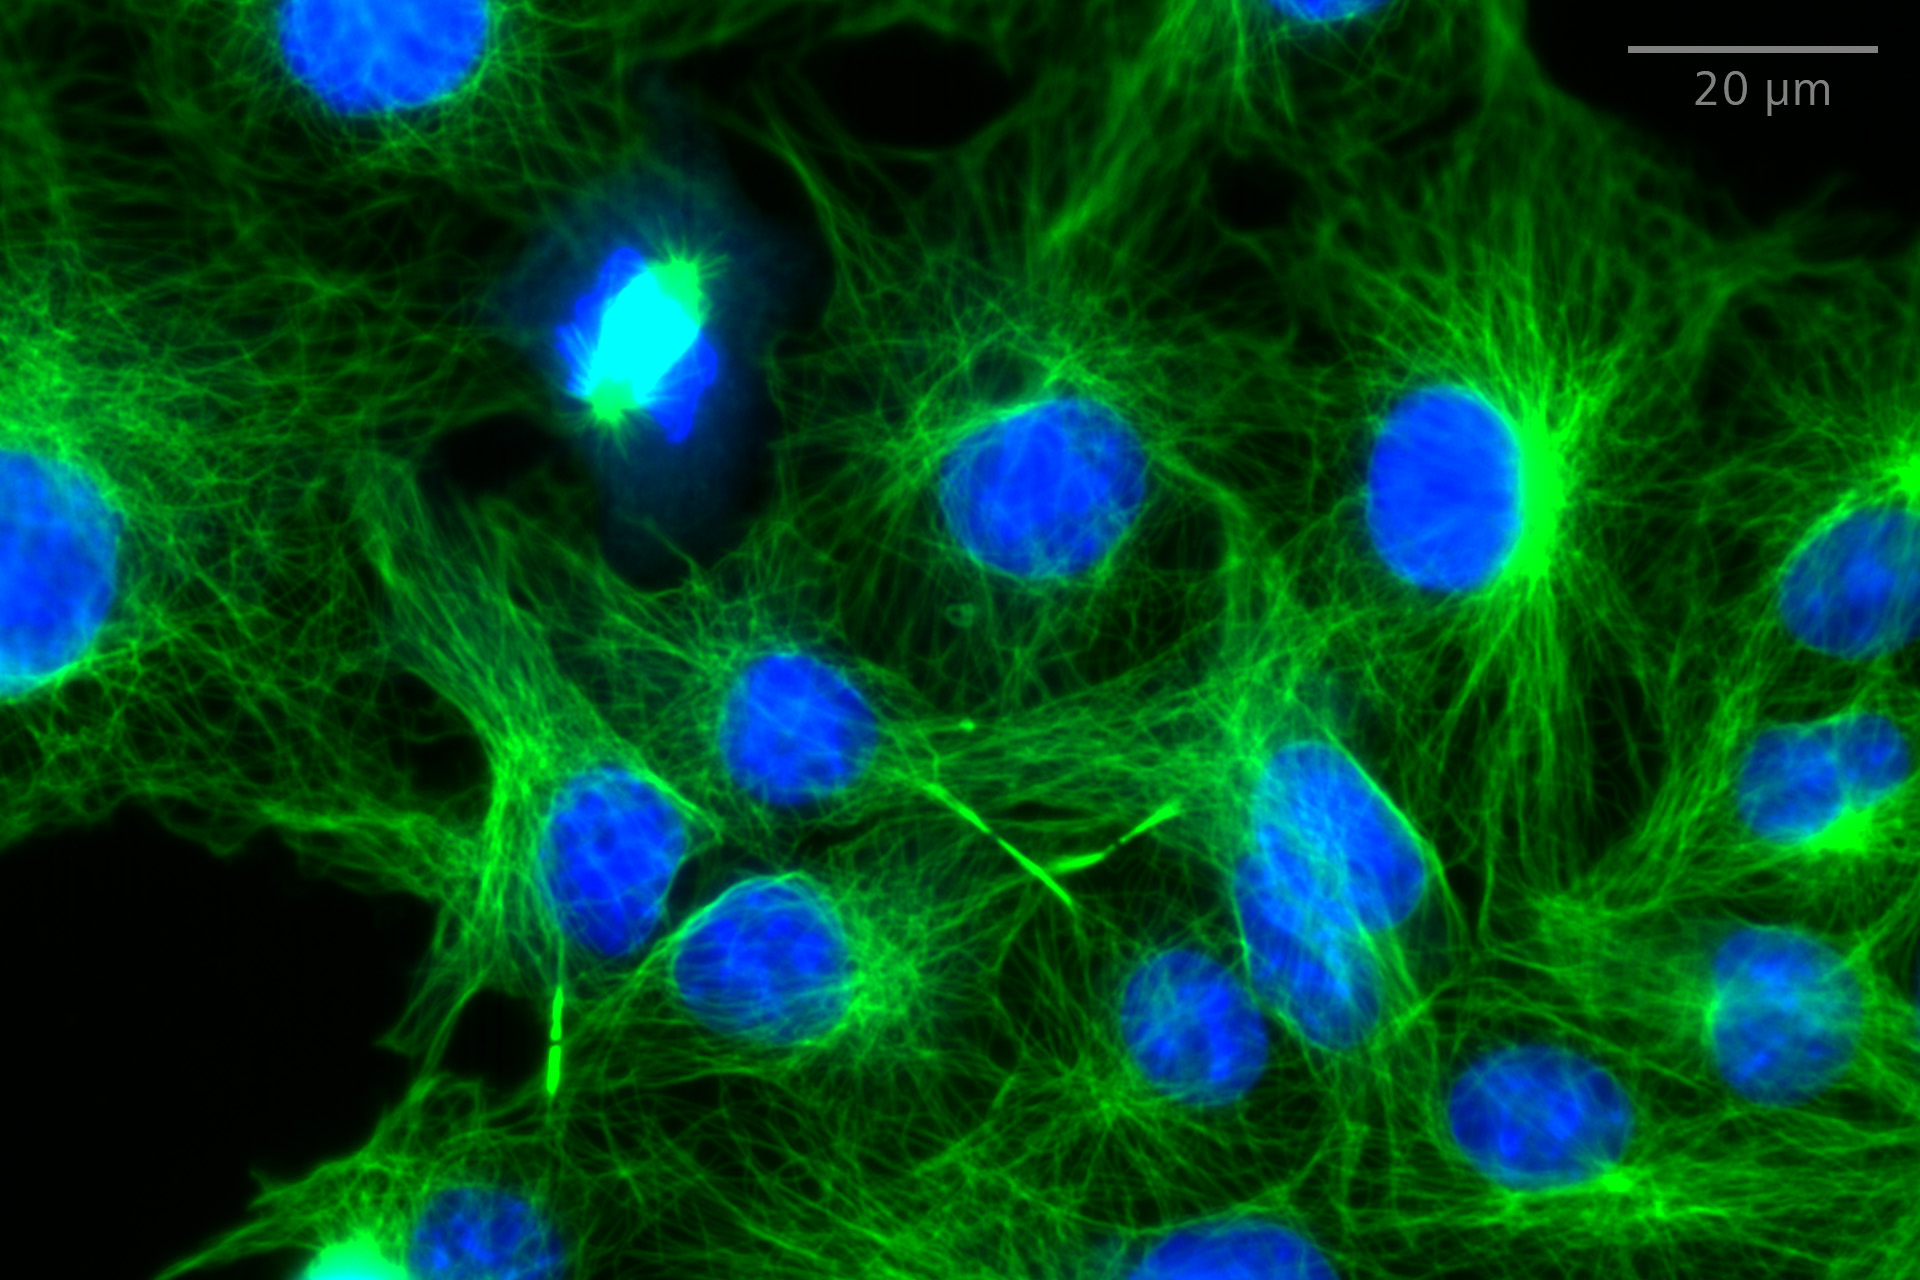 SIM² Apotome: Comparison of widefield and SIM² Apotome single plane images of Cos-7 cells stained for microtubules (anti-alpha-tubulin Alexa Fluor 488, green) and nuclei (Hoechst, blue). Objective: LD LCI Plan-Apochromat 25× / 0.8 Imm Corr